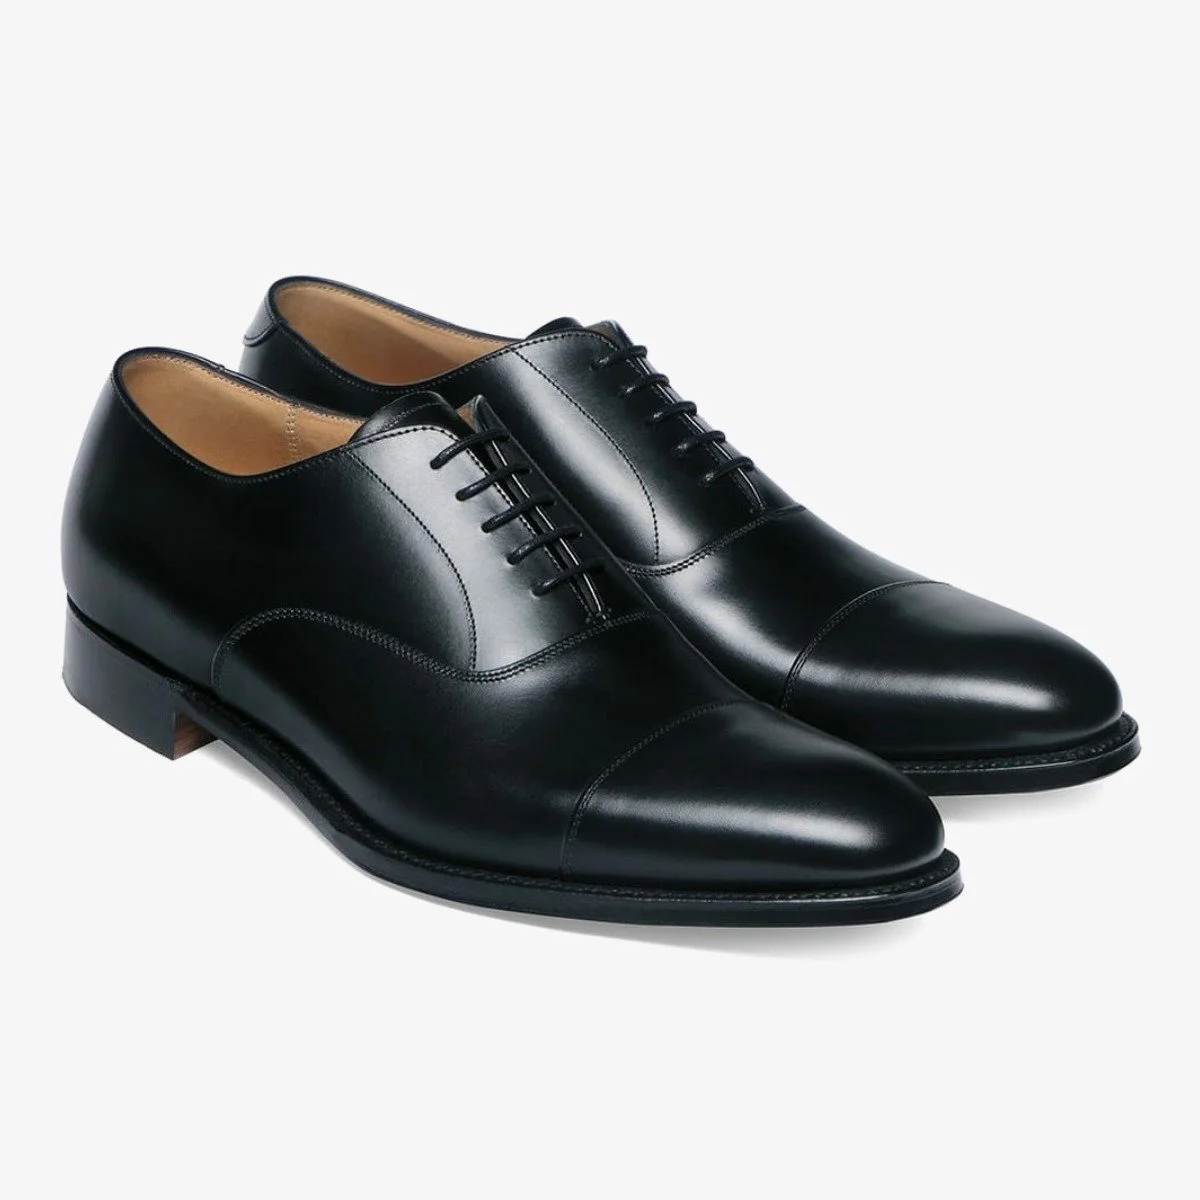 Cheaney Lime black toe cap oxford shoes - G fit